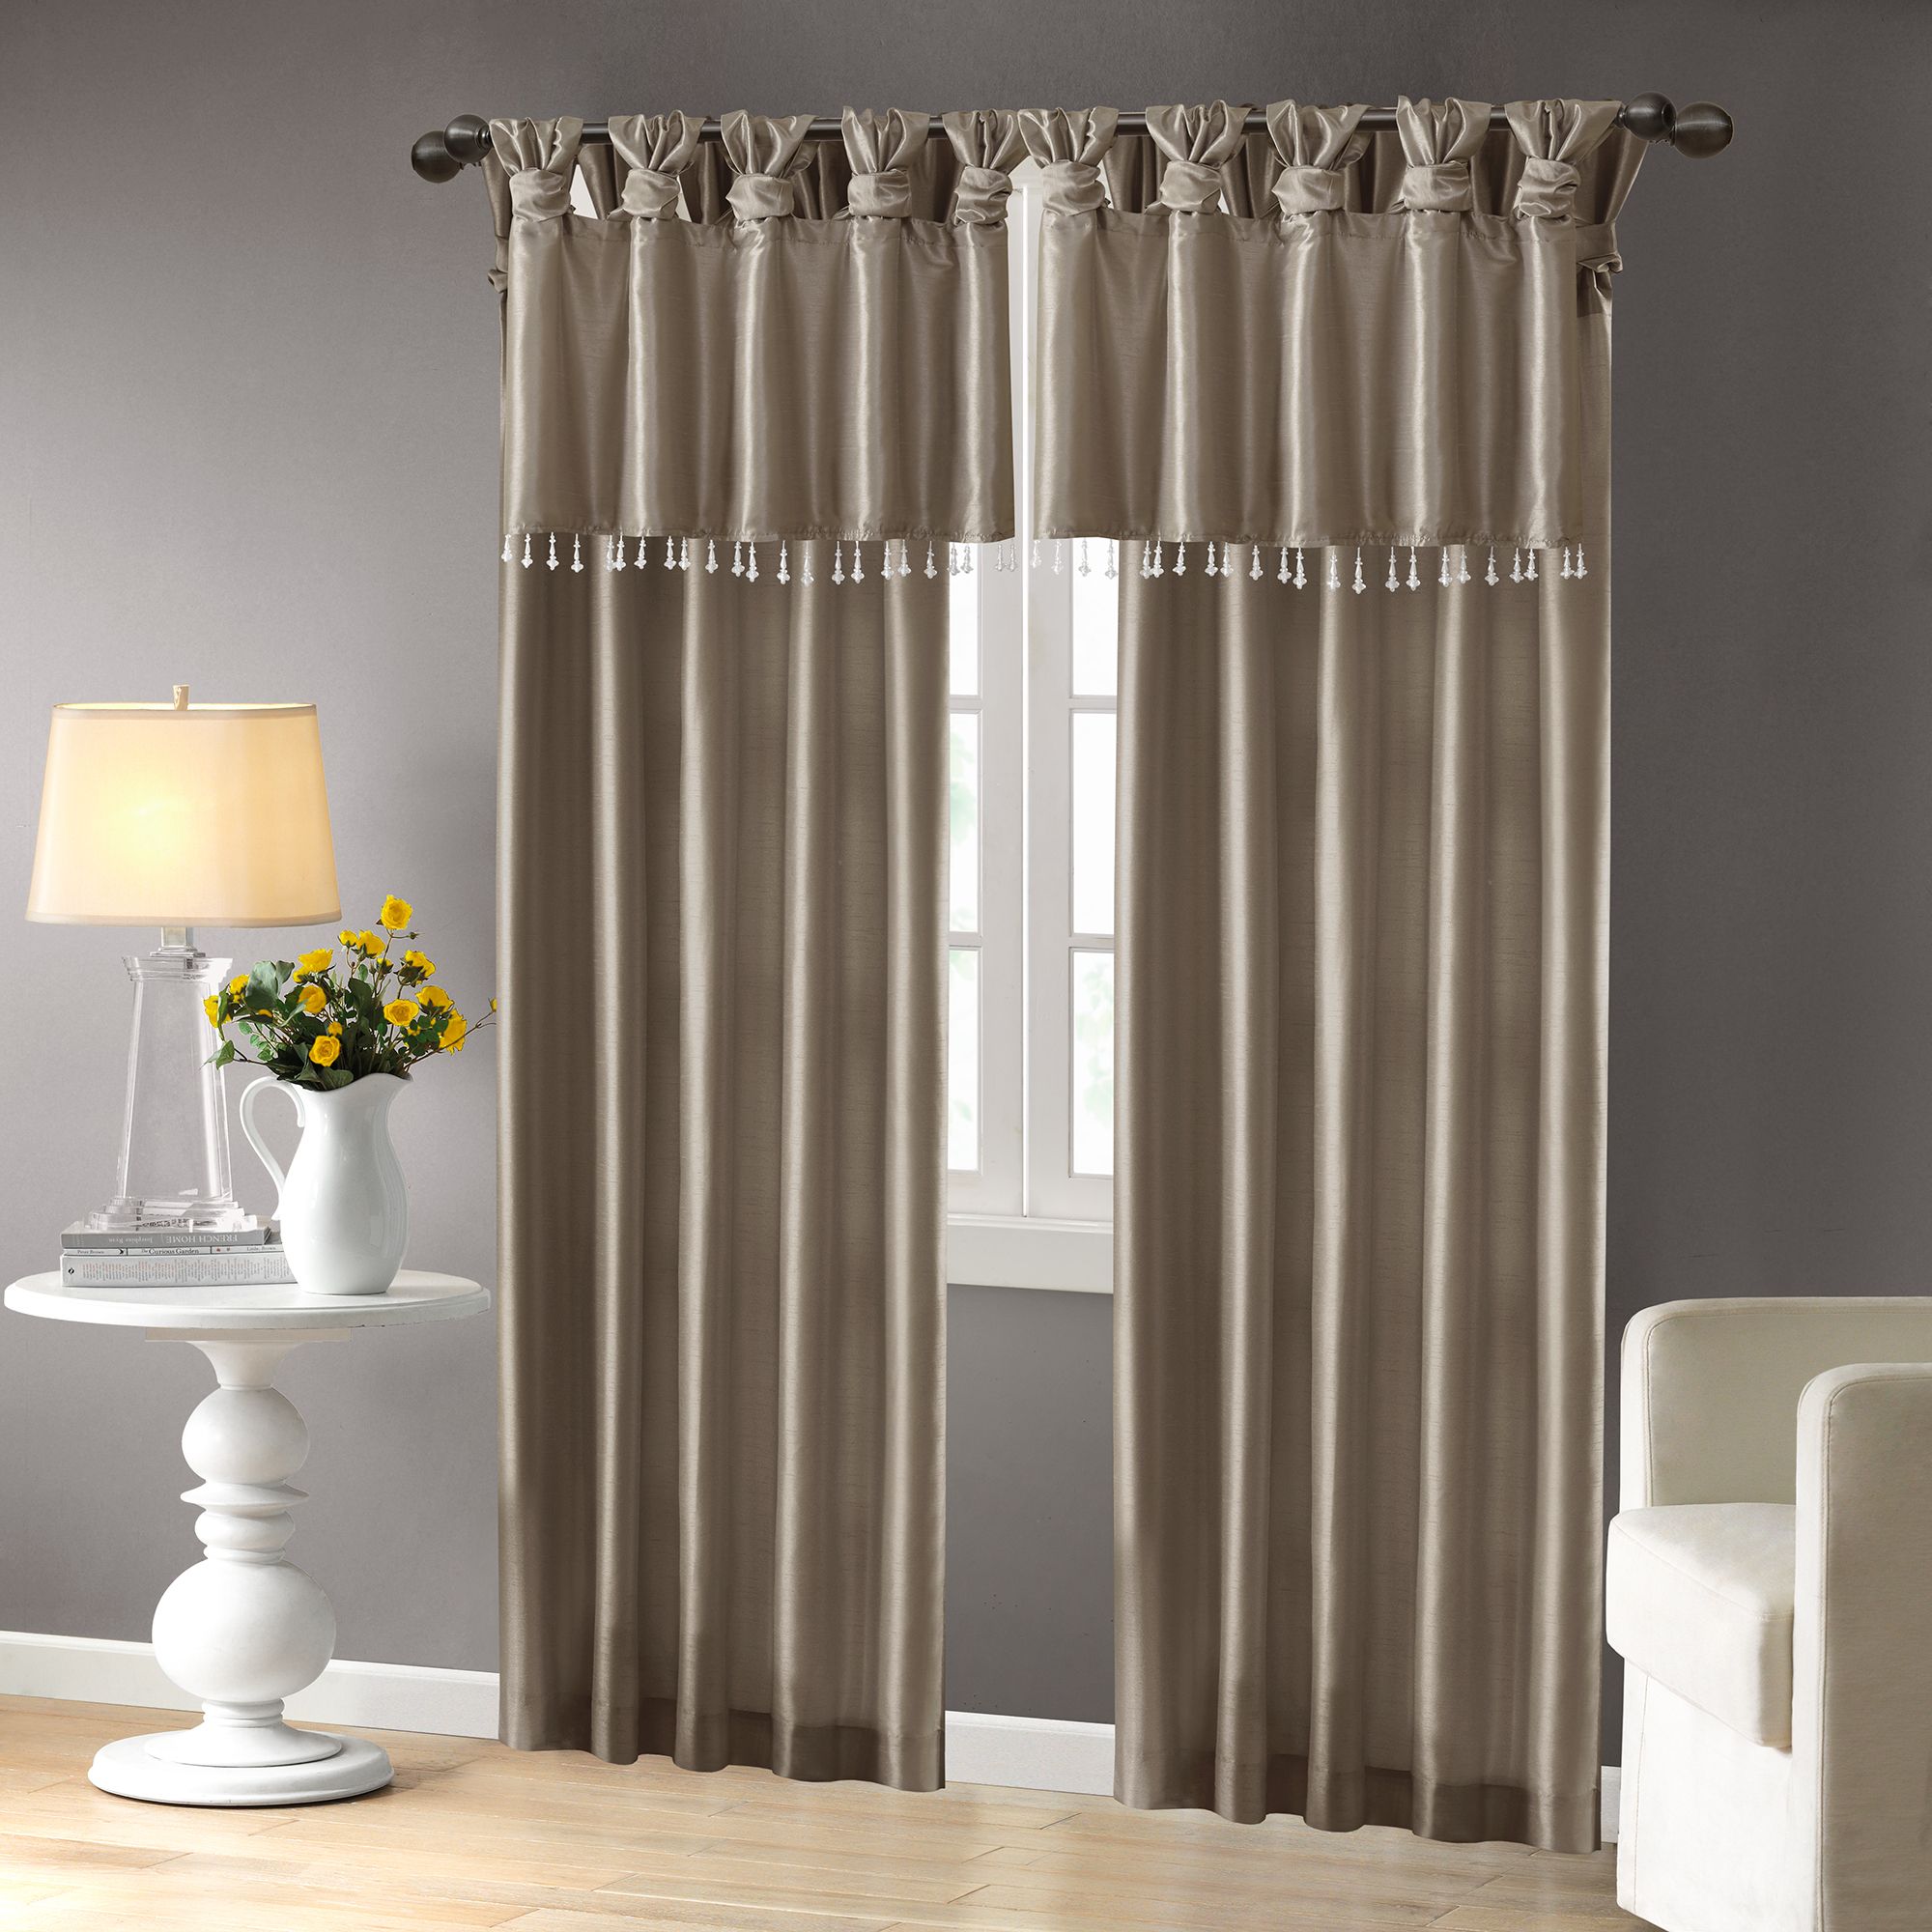 Home Essence Lillian Twist Tab Lined Window Curtain Pertaining To Twisted Tab Lined Single Curtain Panels (View 1 of 30)